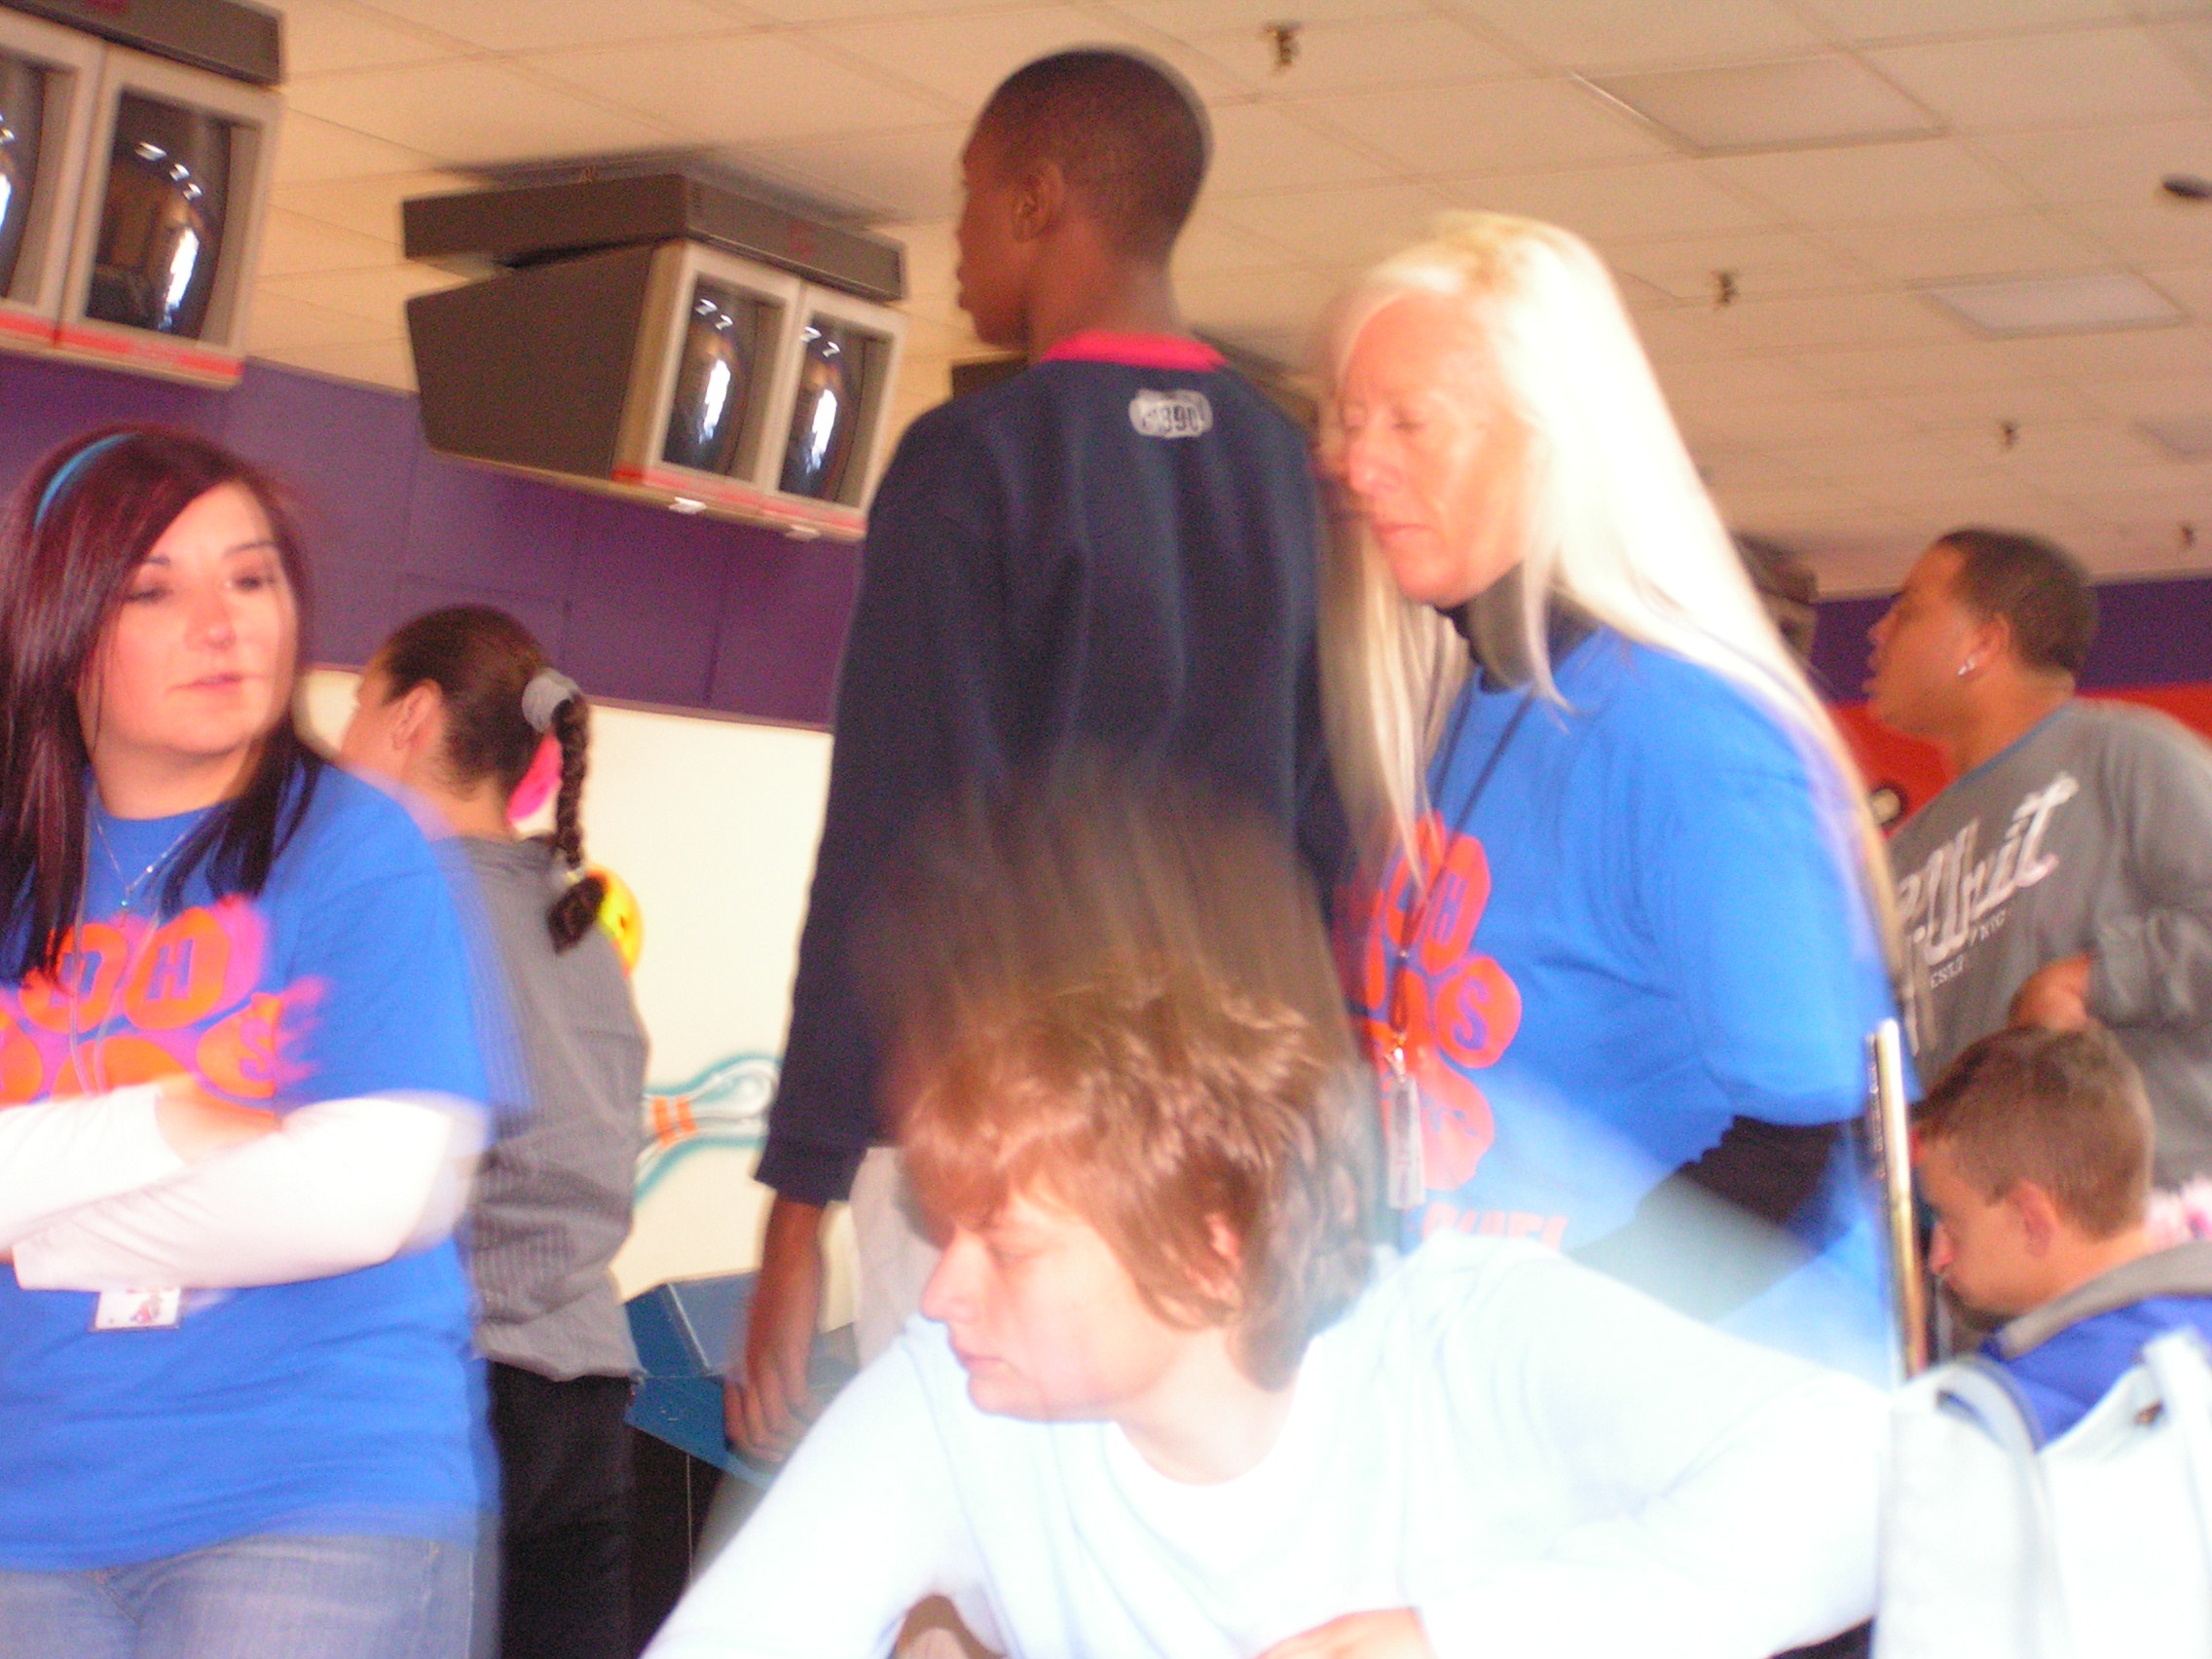 ./2006/Special Olympics Bowling/SOBowlingPractice5.jpg